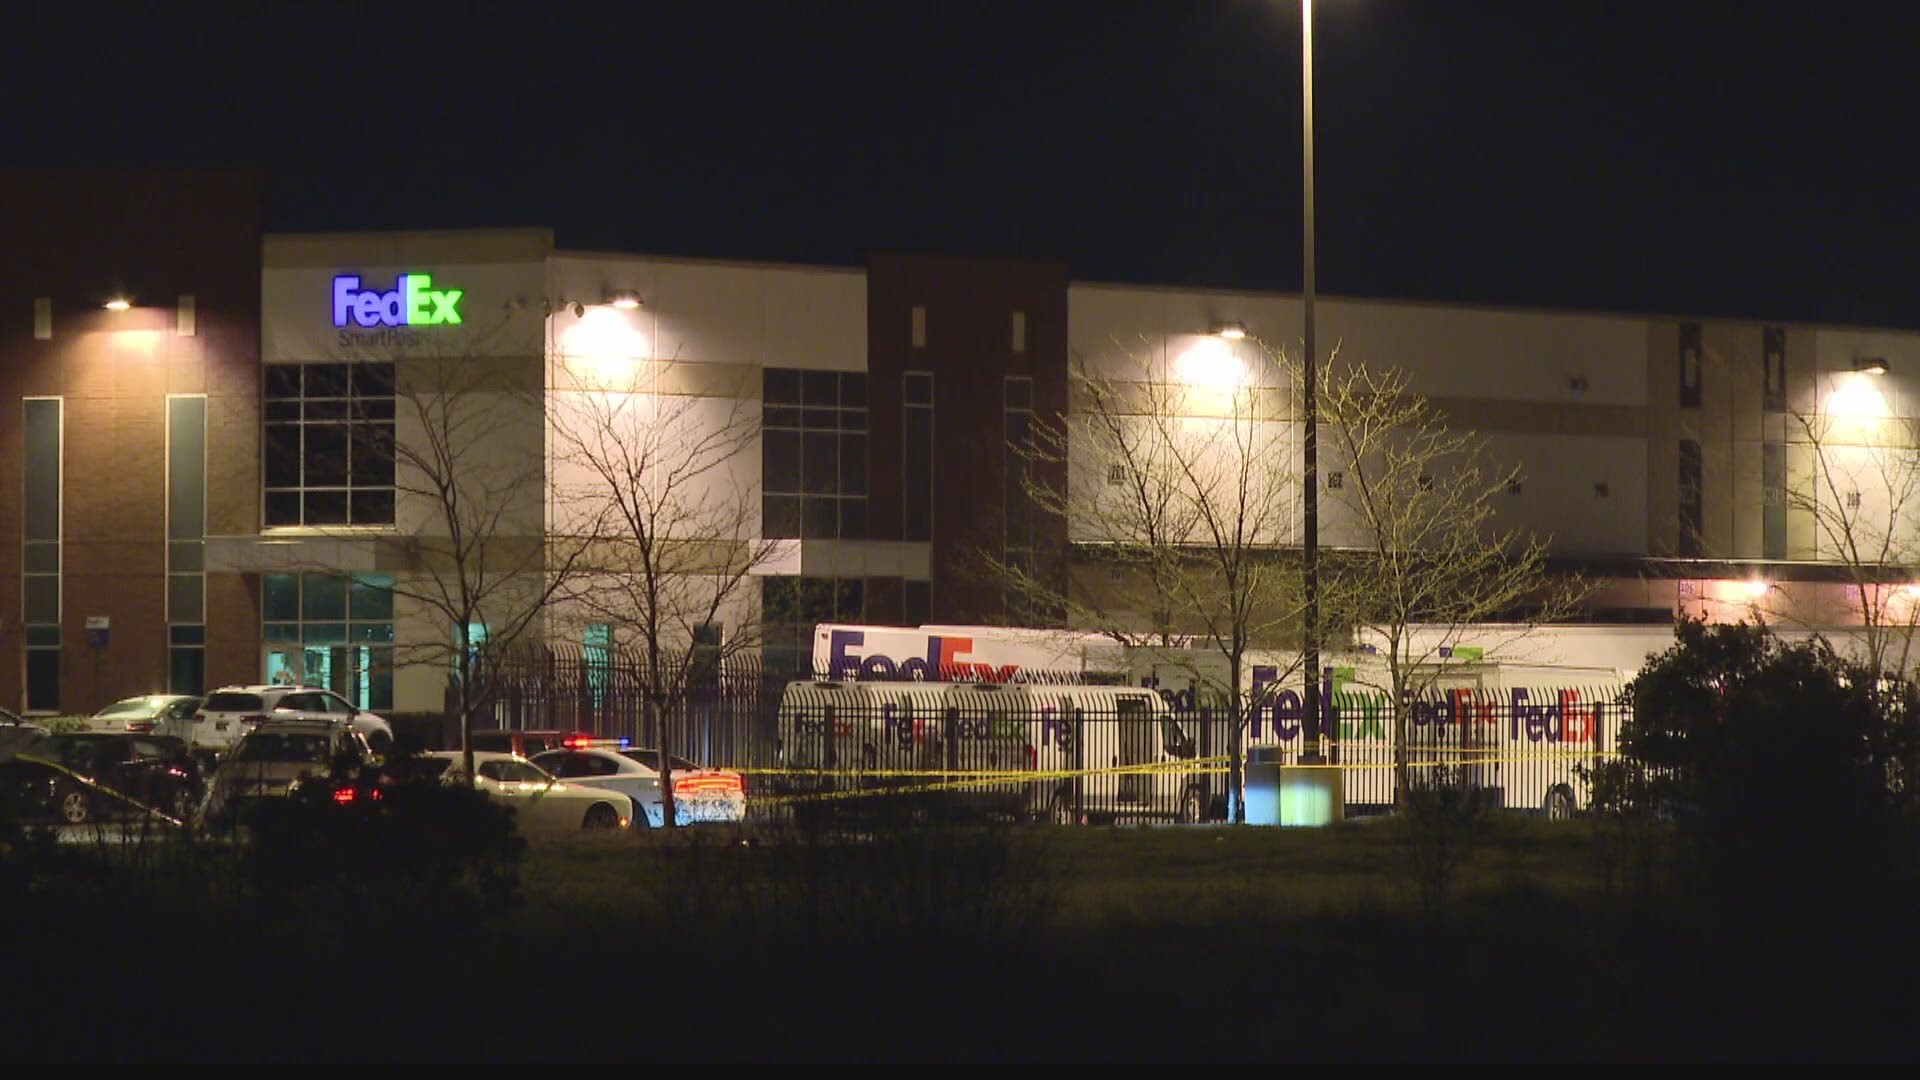 Eight people were killed and five were injured when a gunman opened fire at a FedEx Ground facility in Indianapolis.